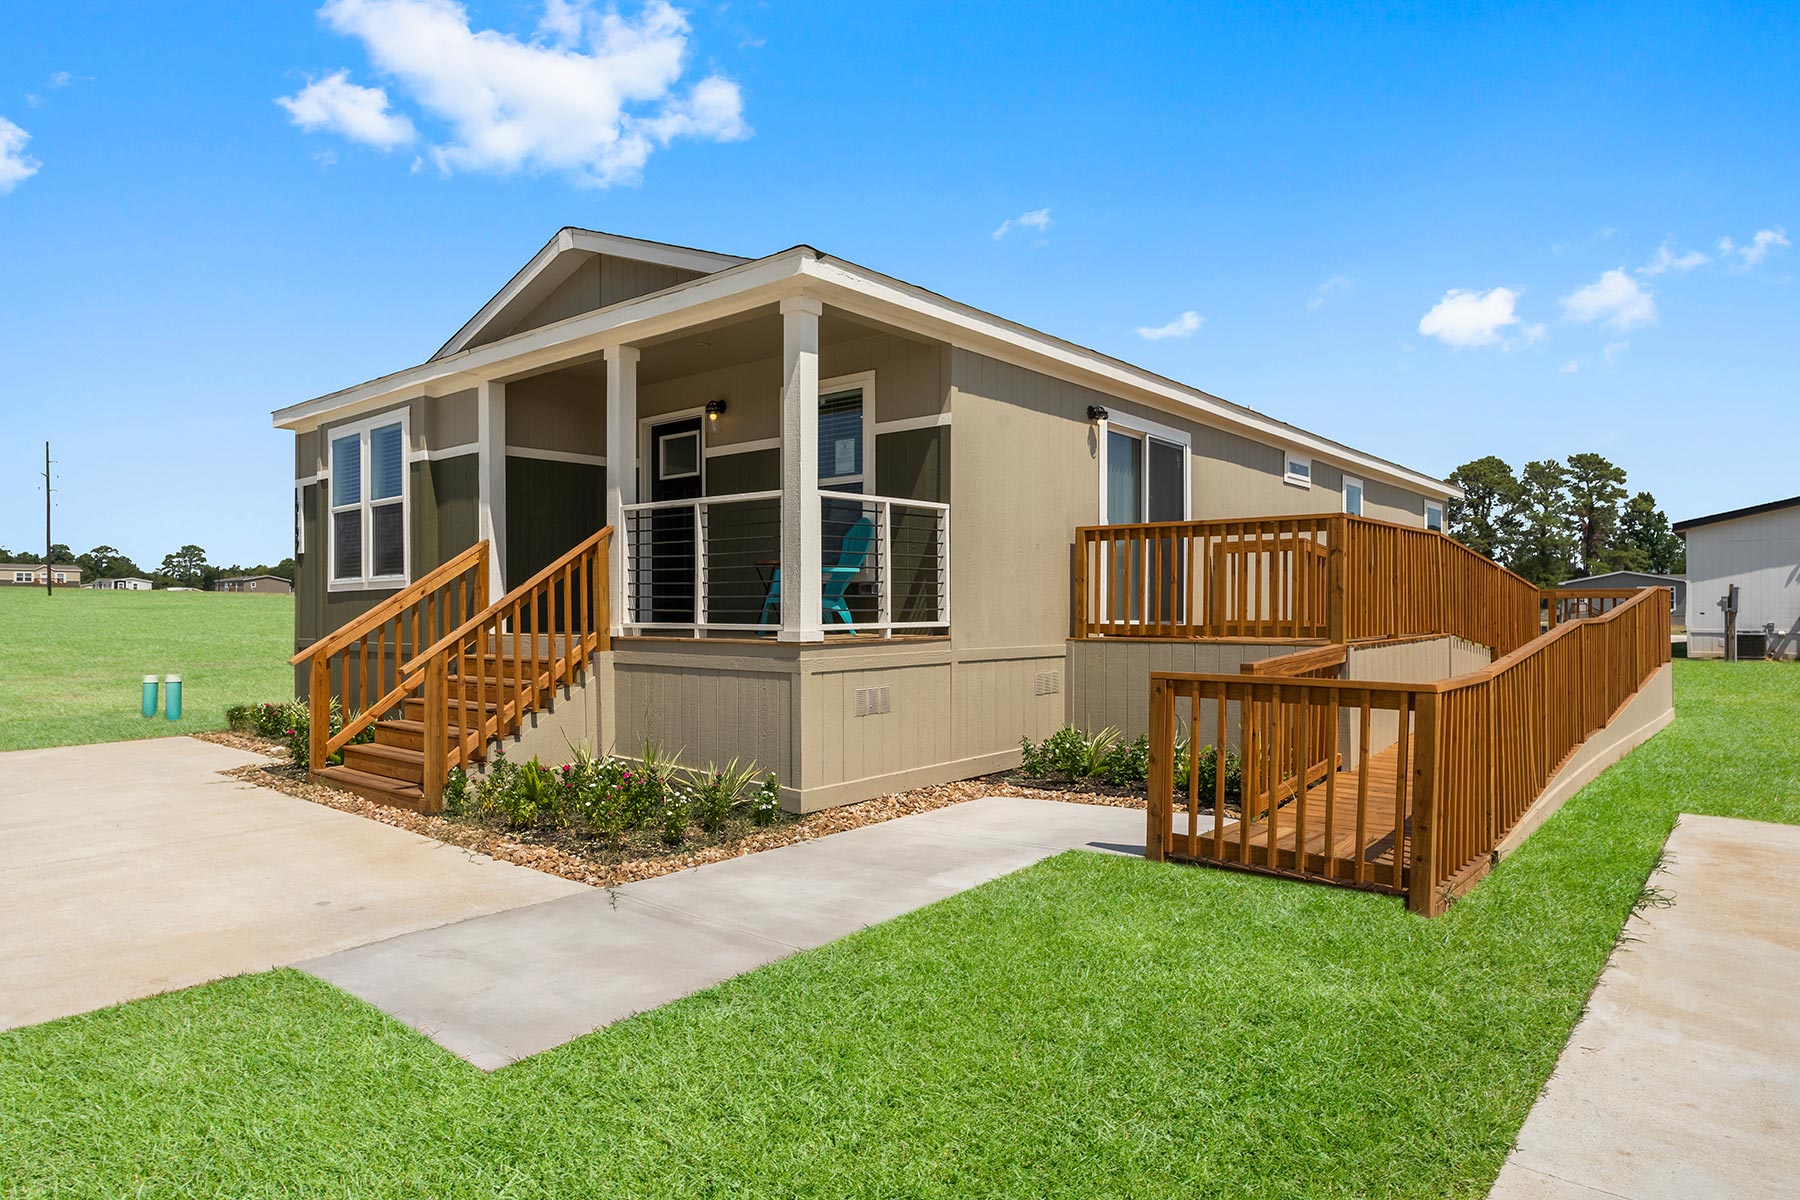 Choosing The Right Accessible Manufactured Home